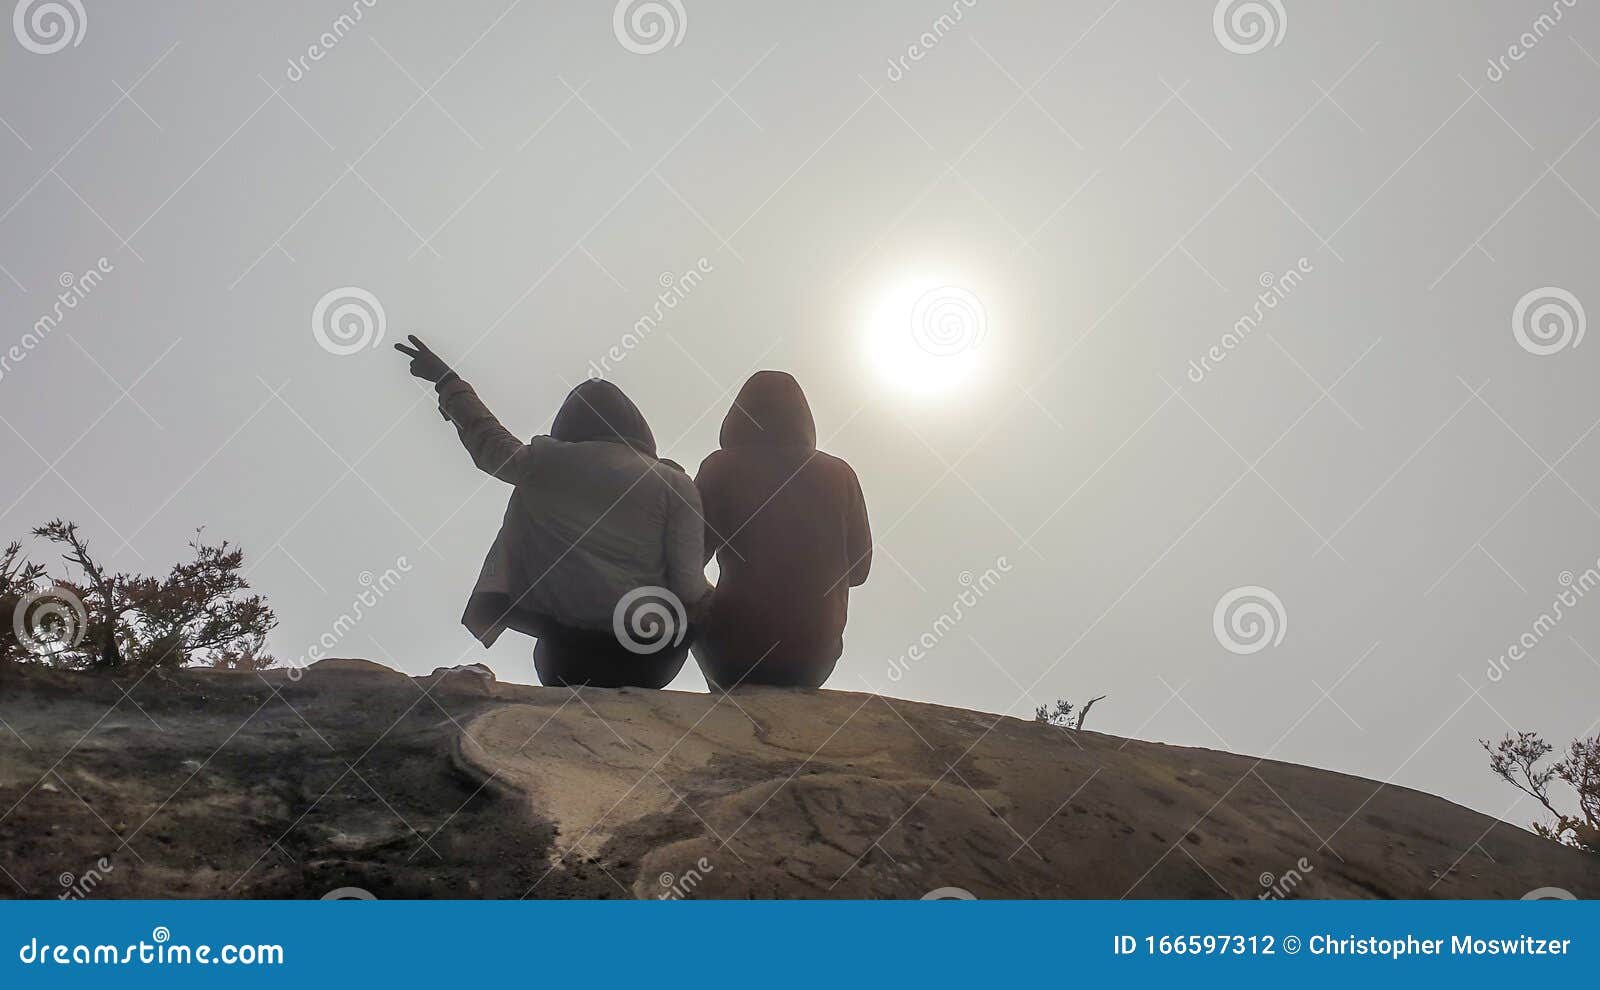 bajawa - couple sitting in between the clouds